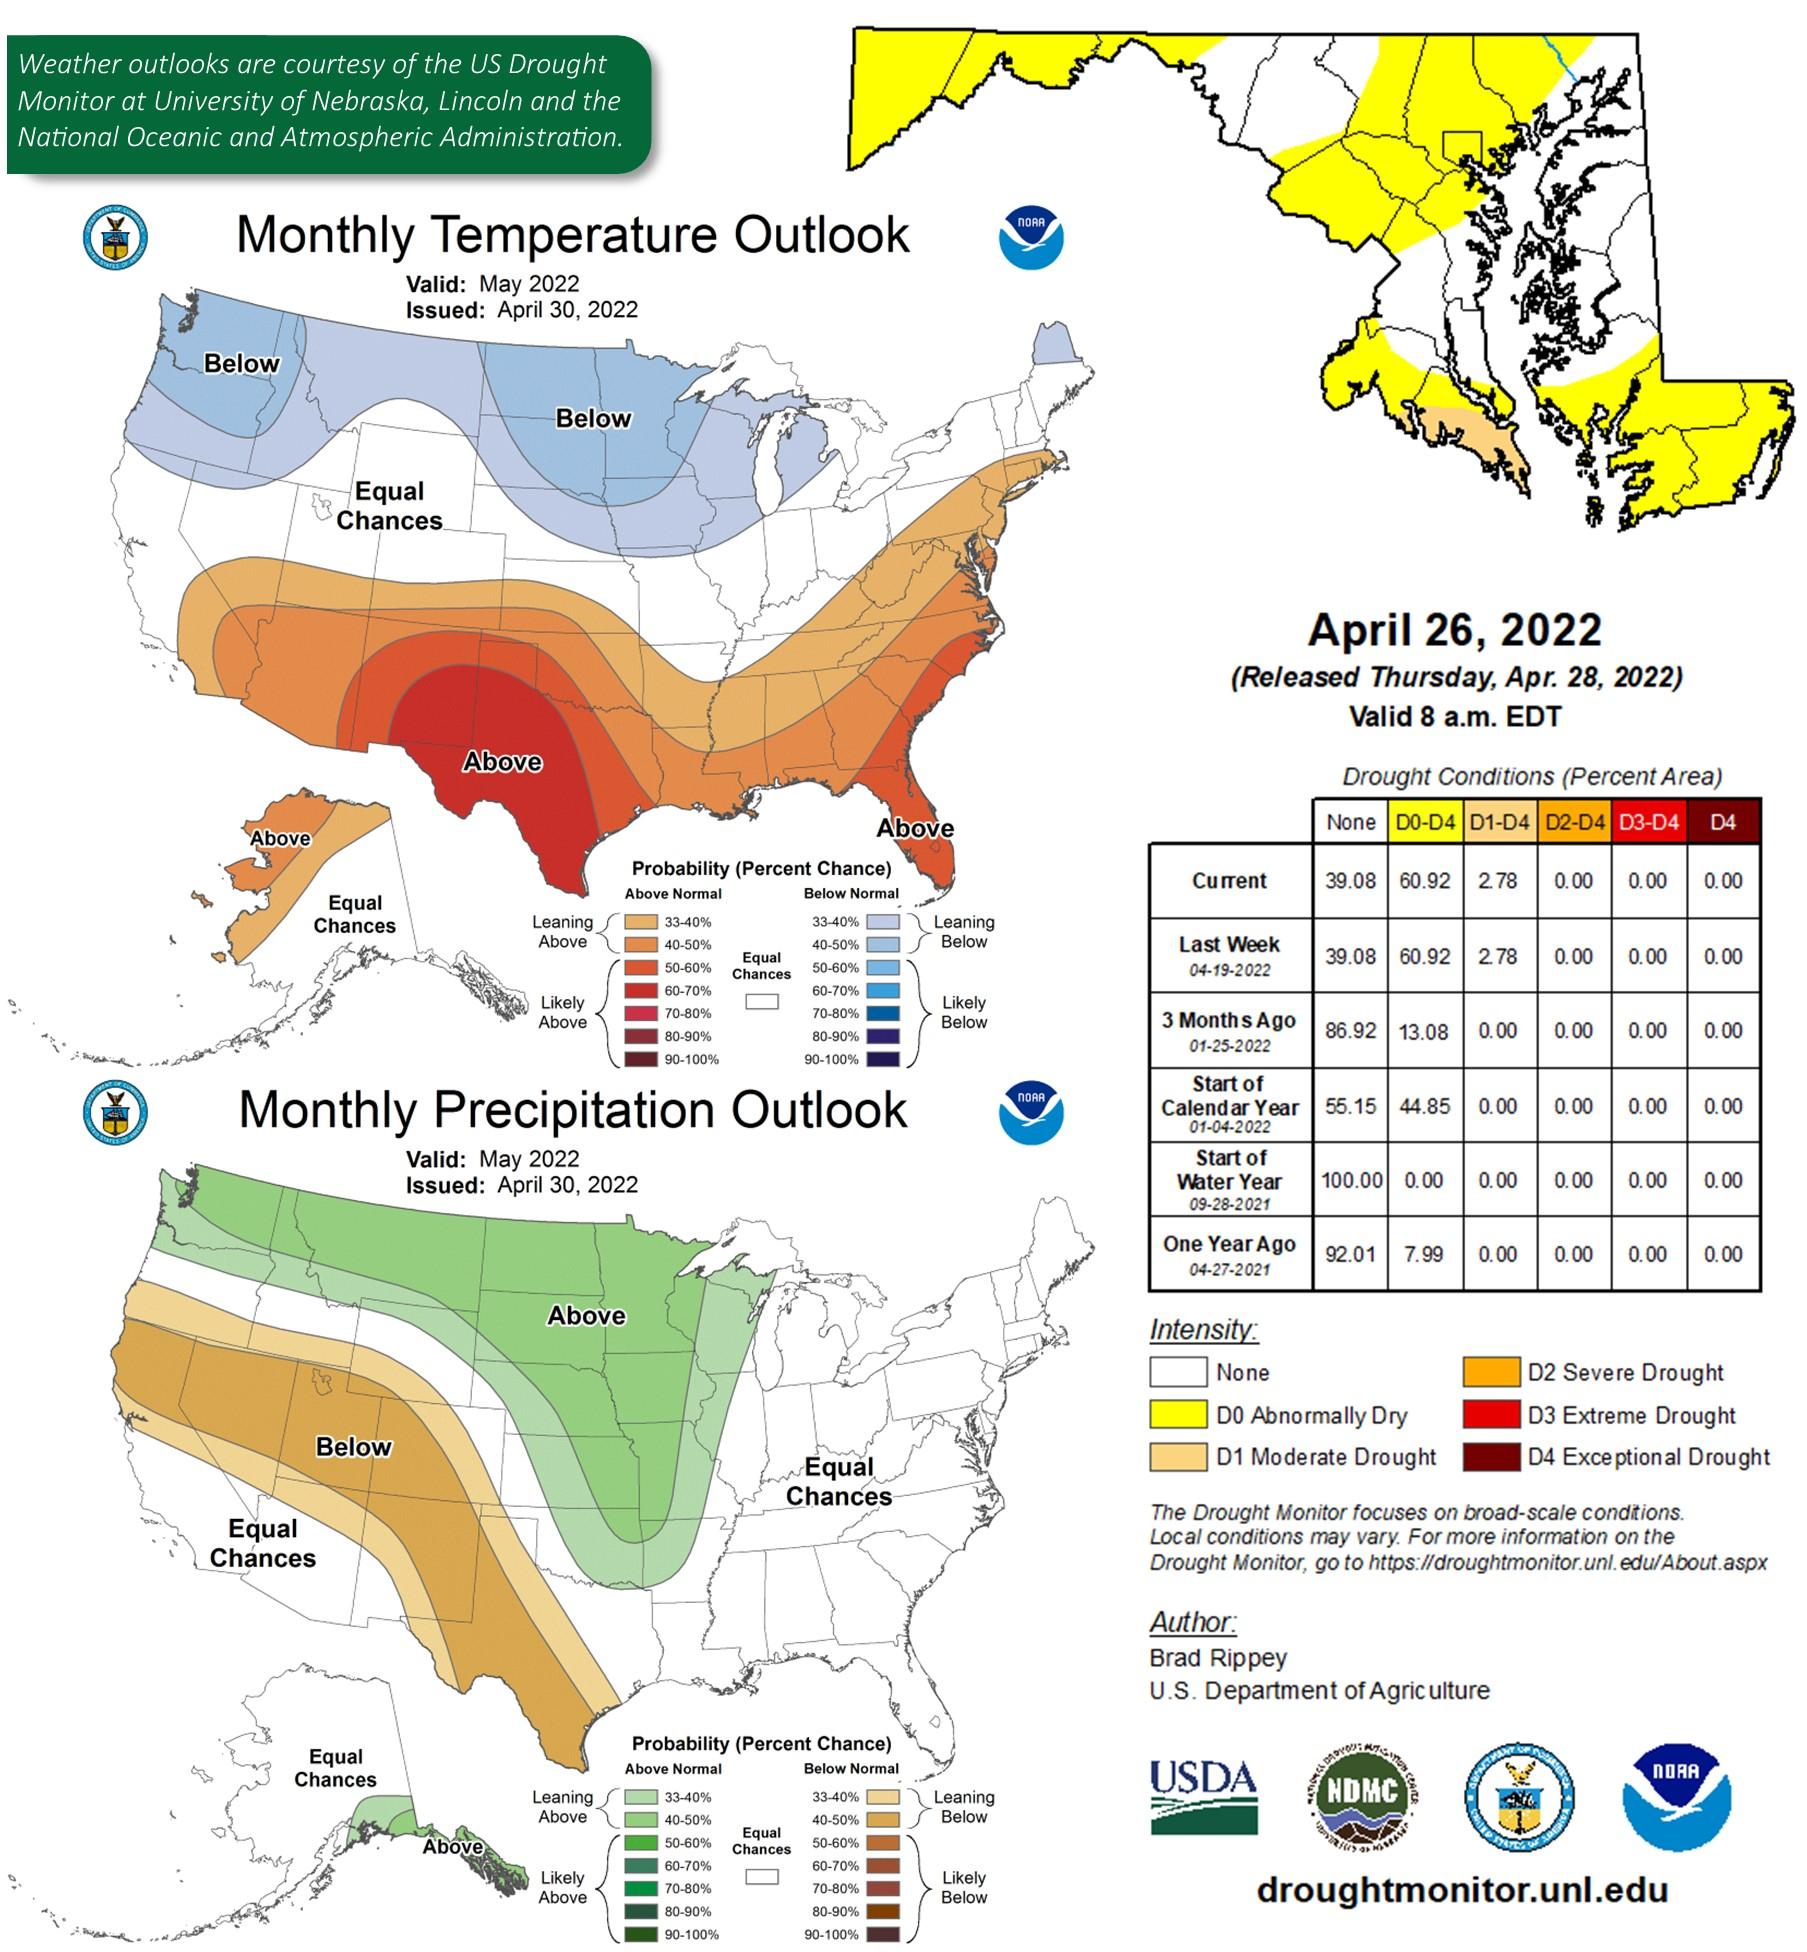 Charts for the monthly outlook (May) on temperature, drought conditions, precipitation.